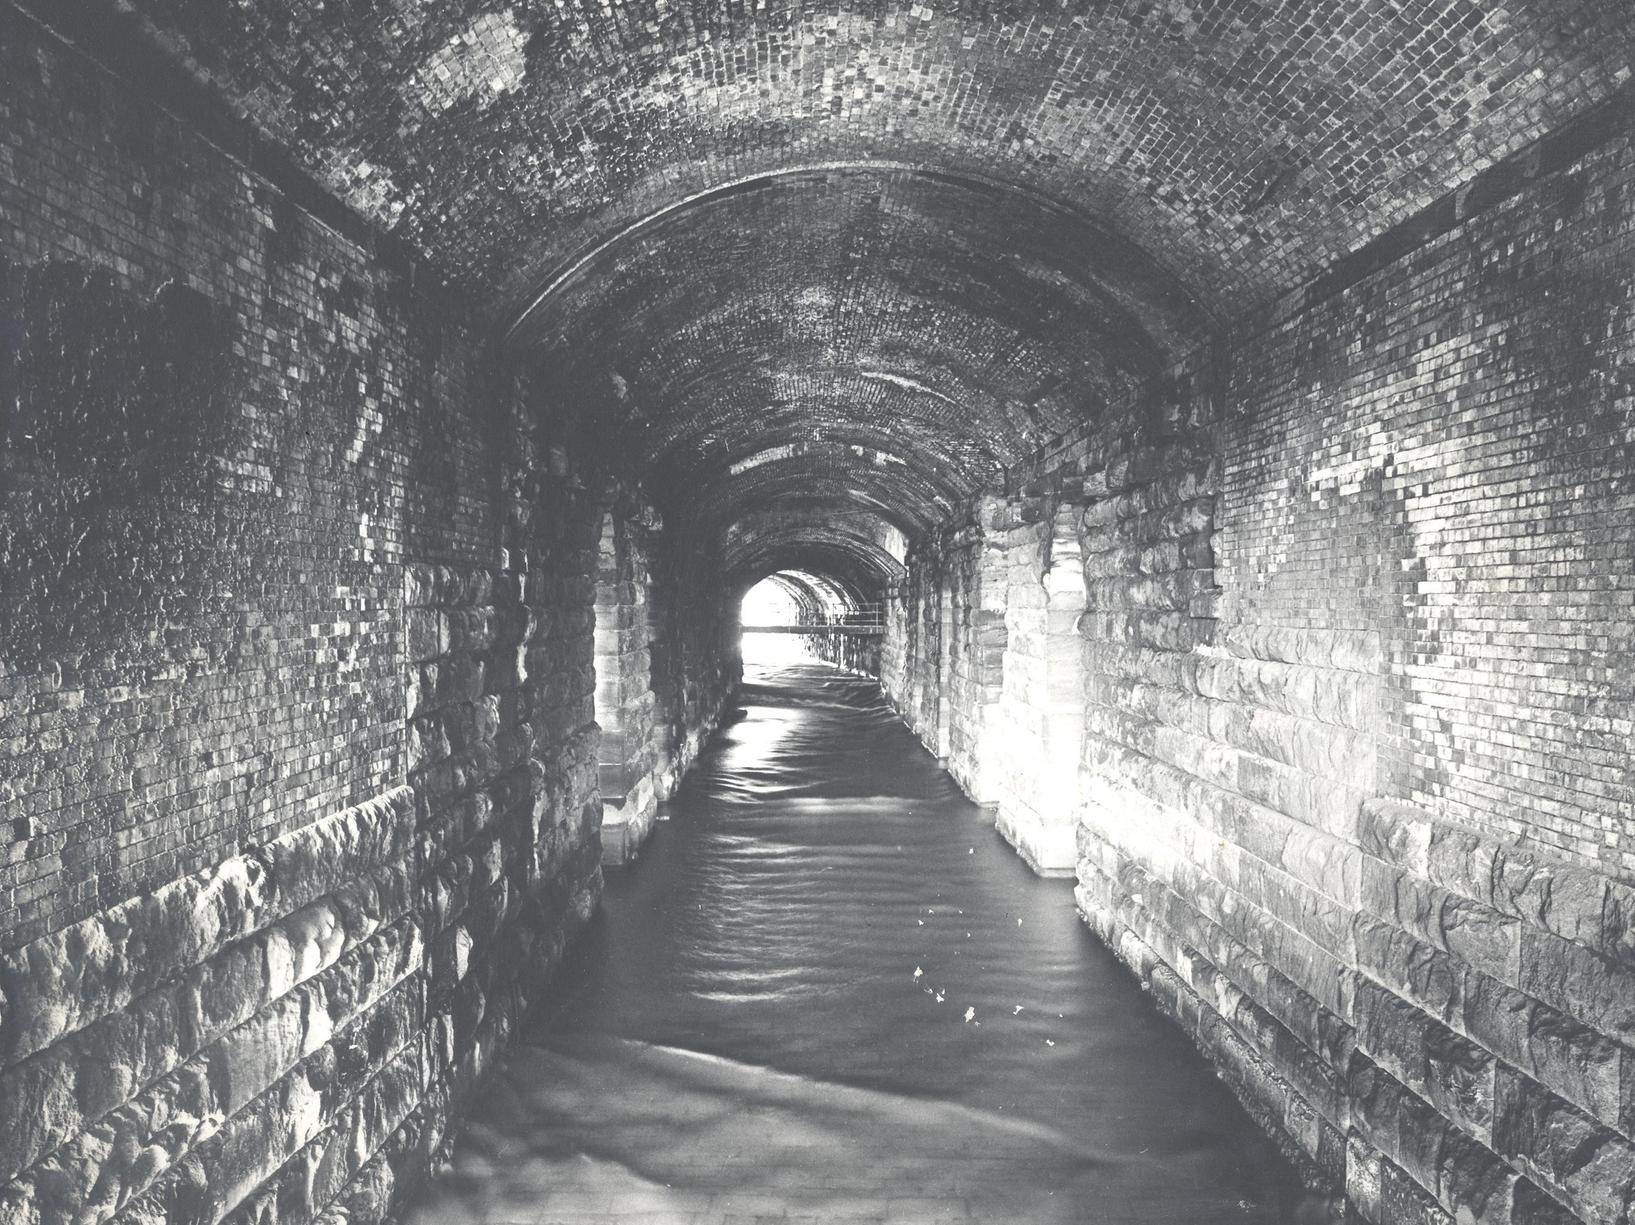 The River Aire running under the Dark Arches.